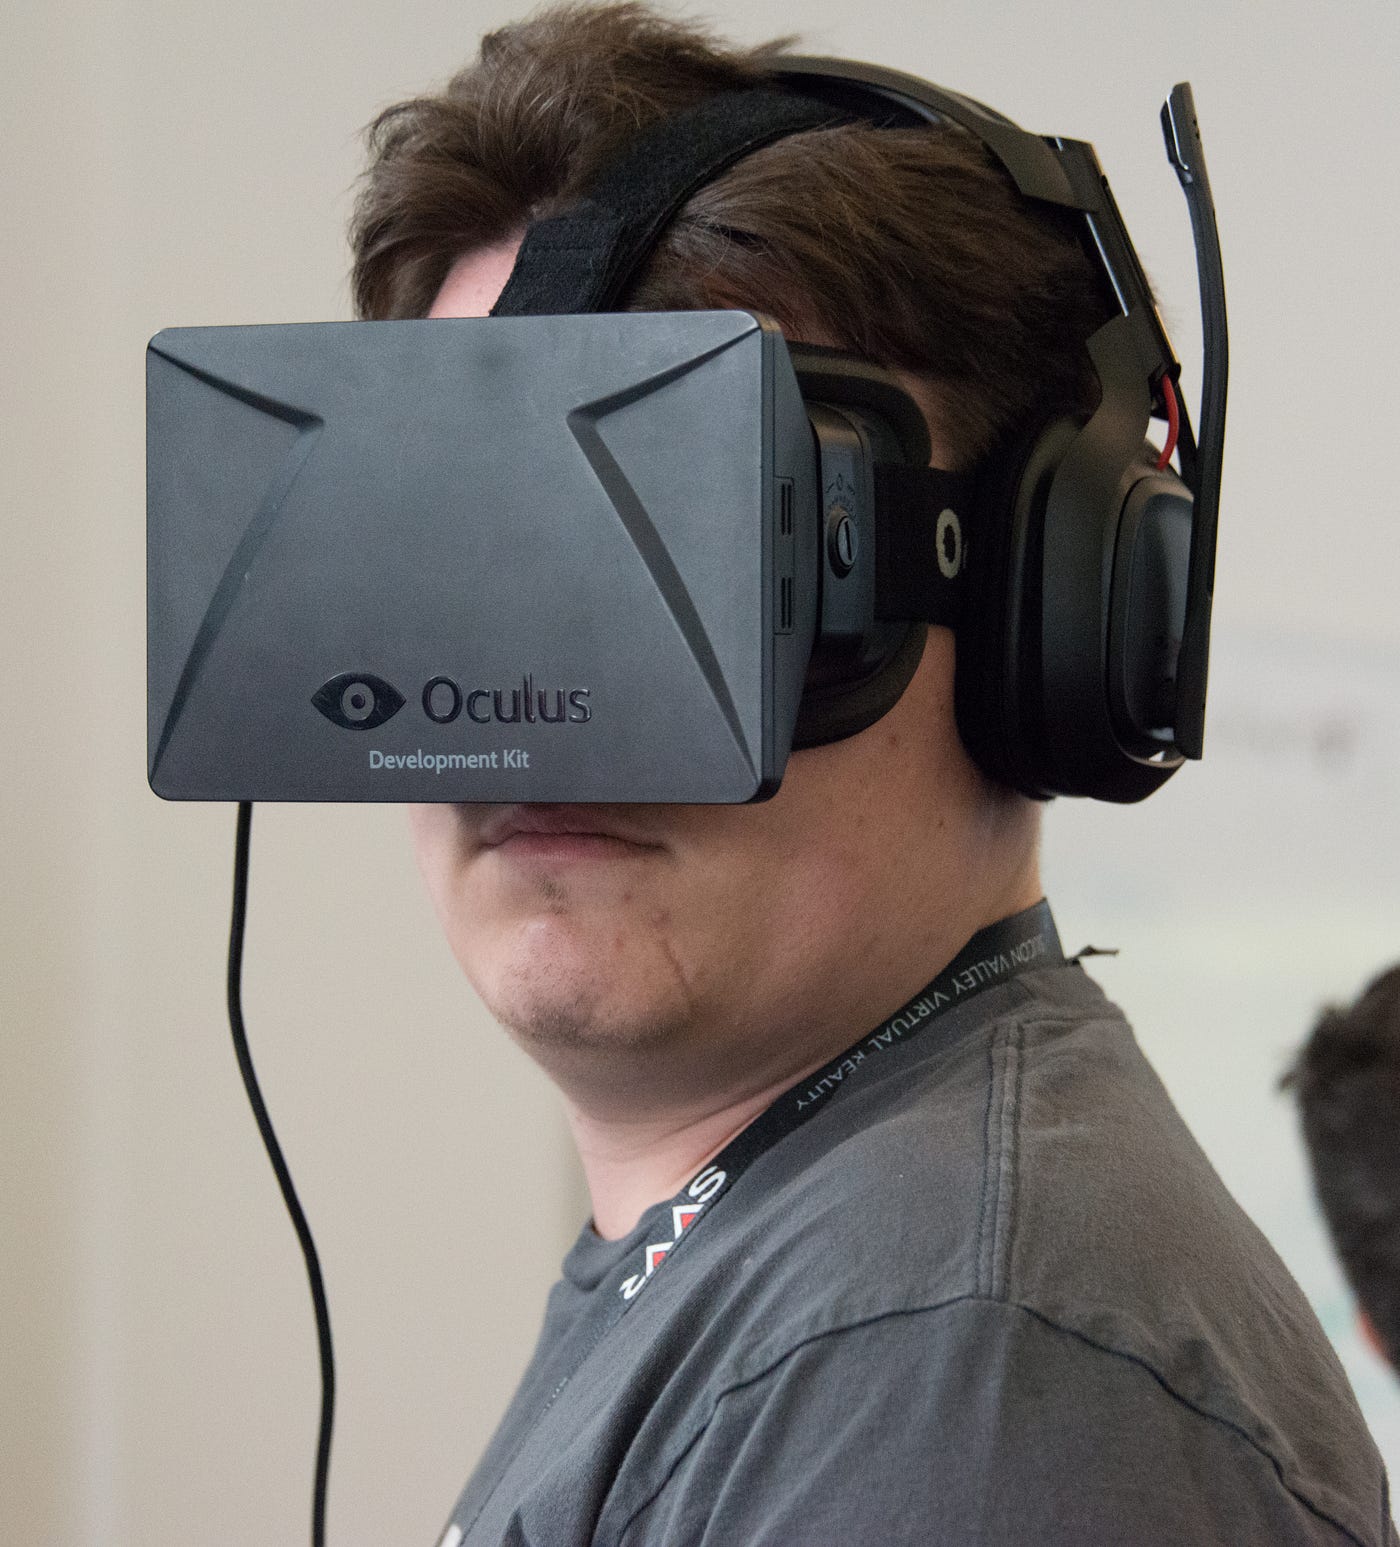 VR on the Horizon. At the time writing this article, we… | by Chris Brown | Medium